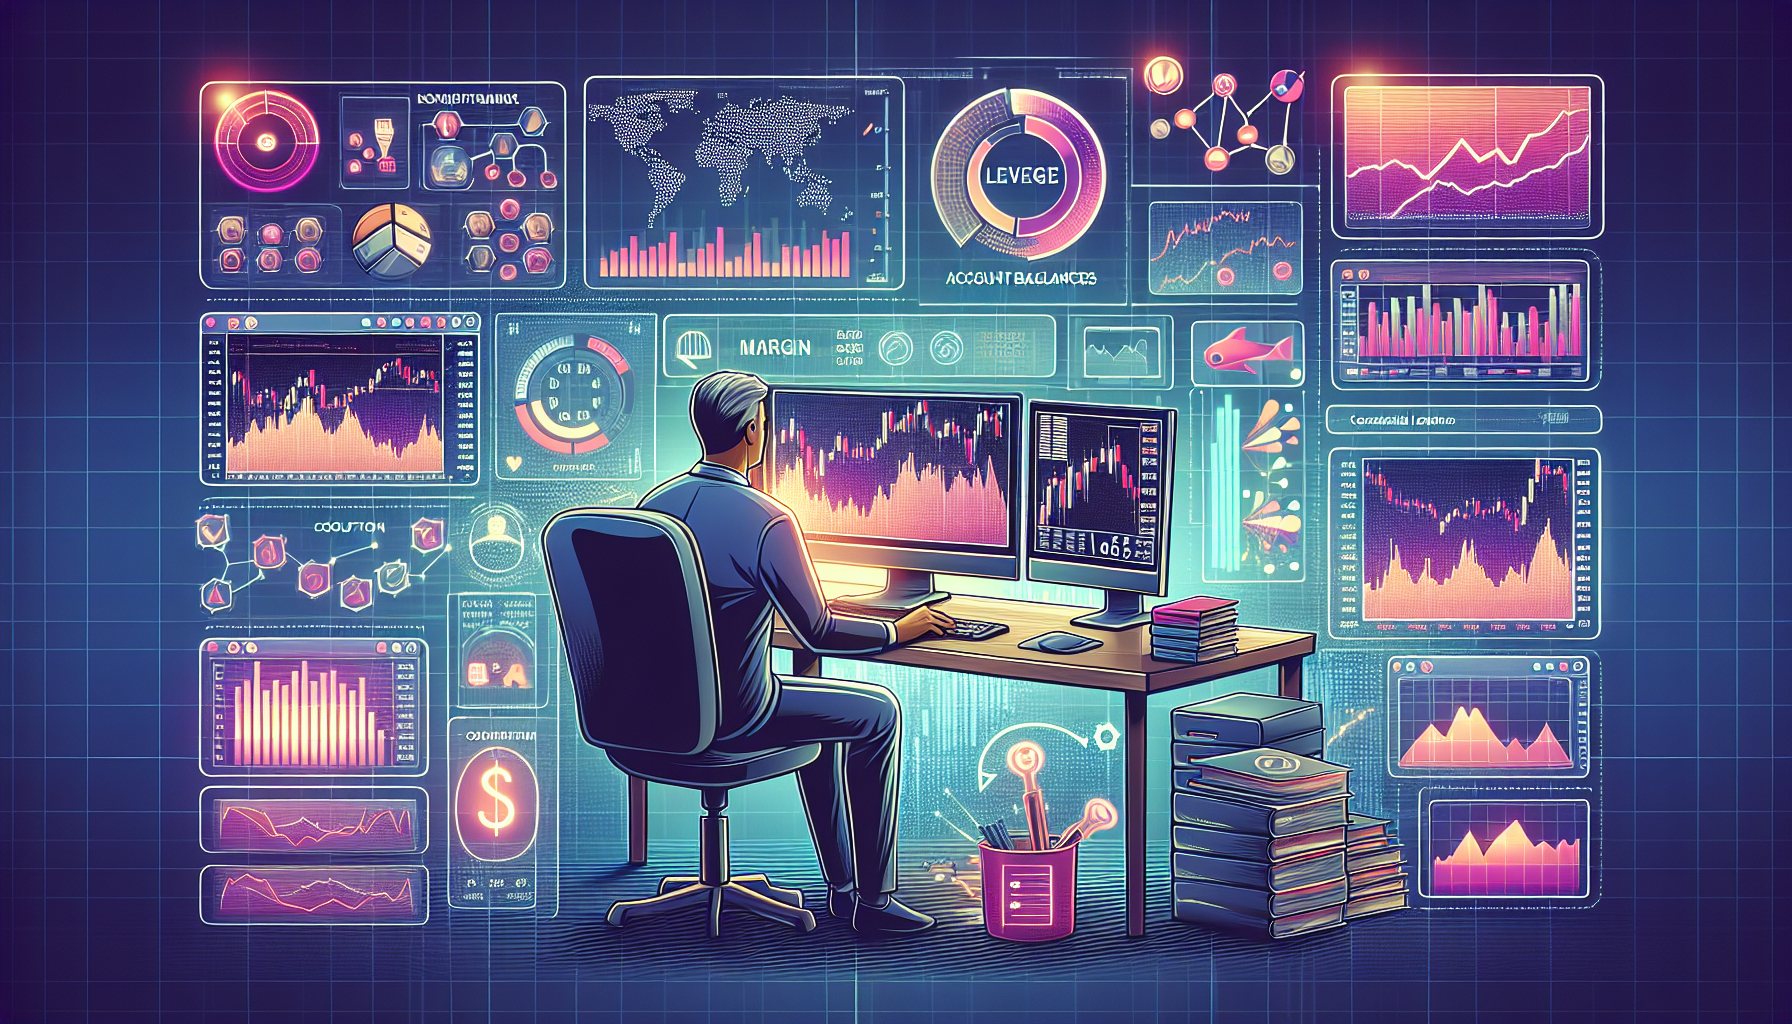 Create a detailed image illustrating the concept of IBKR (Interactive Brokers) margin. Show a trader at a desk with multiple computer screens displaying financial charts and IBKR platform interfaces. Include visual elements that represent margin trading, such as leverage indicators, margin balances, and risk management tools. Surround the trader with educational icons like a book on trading, a calculator, and informative charts to suggest a comprehensive guide. Ensure the overall scene appears professional and informative.